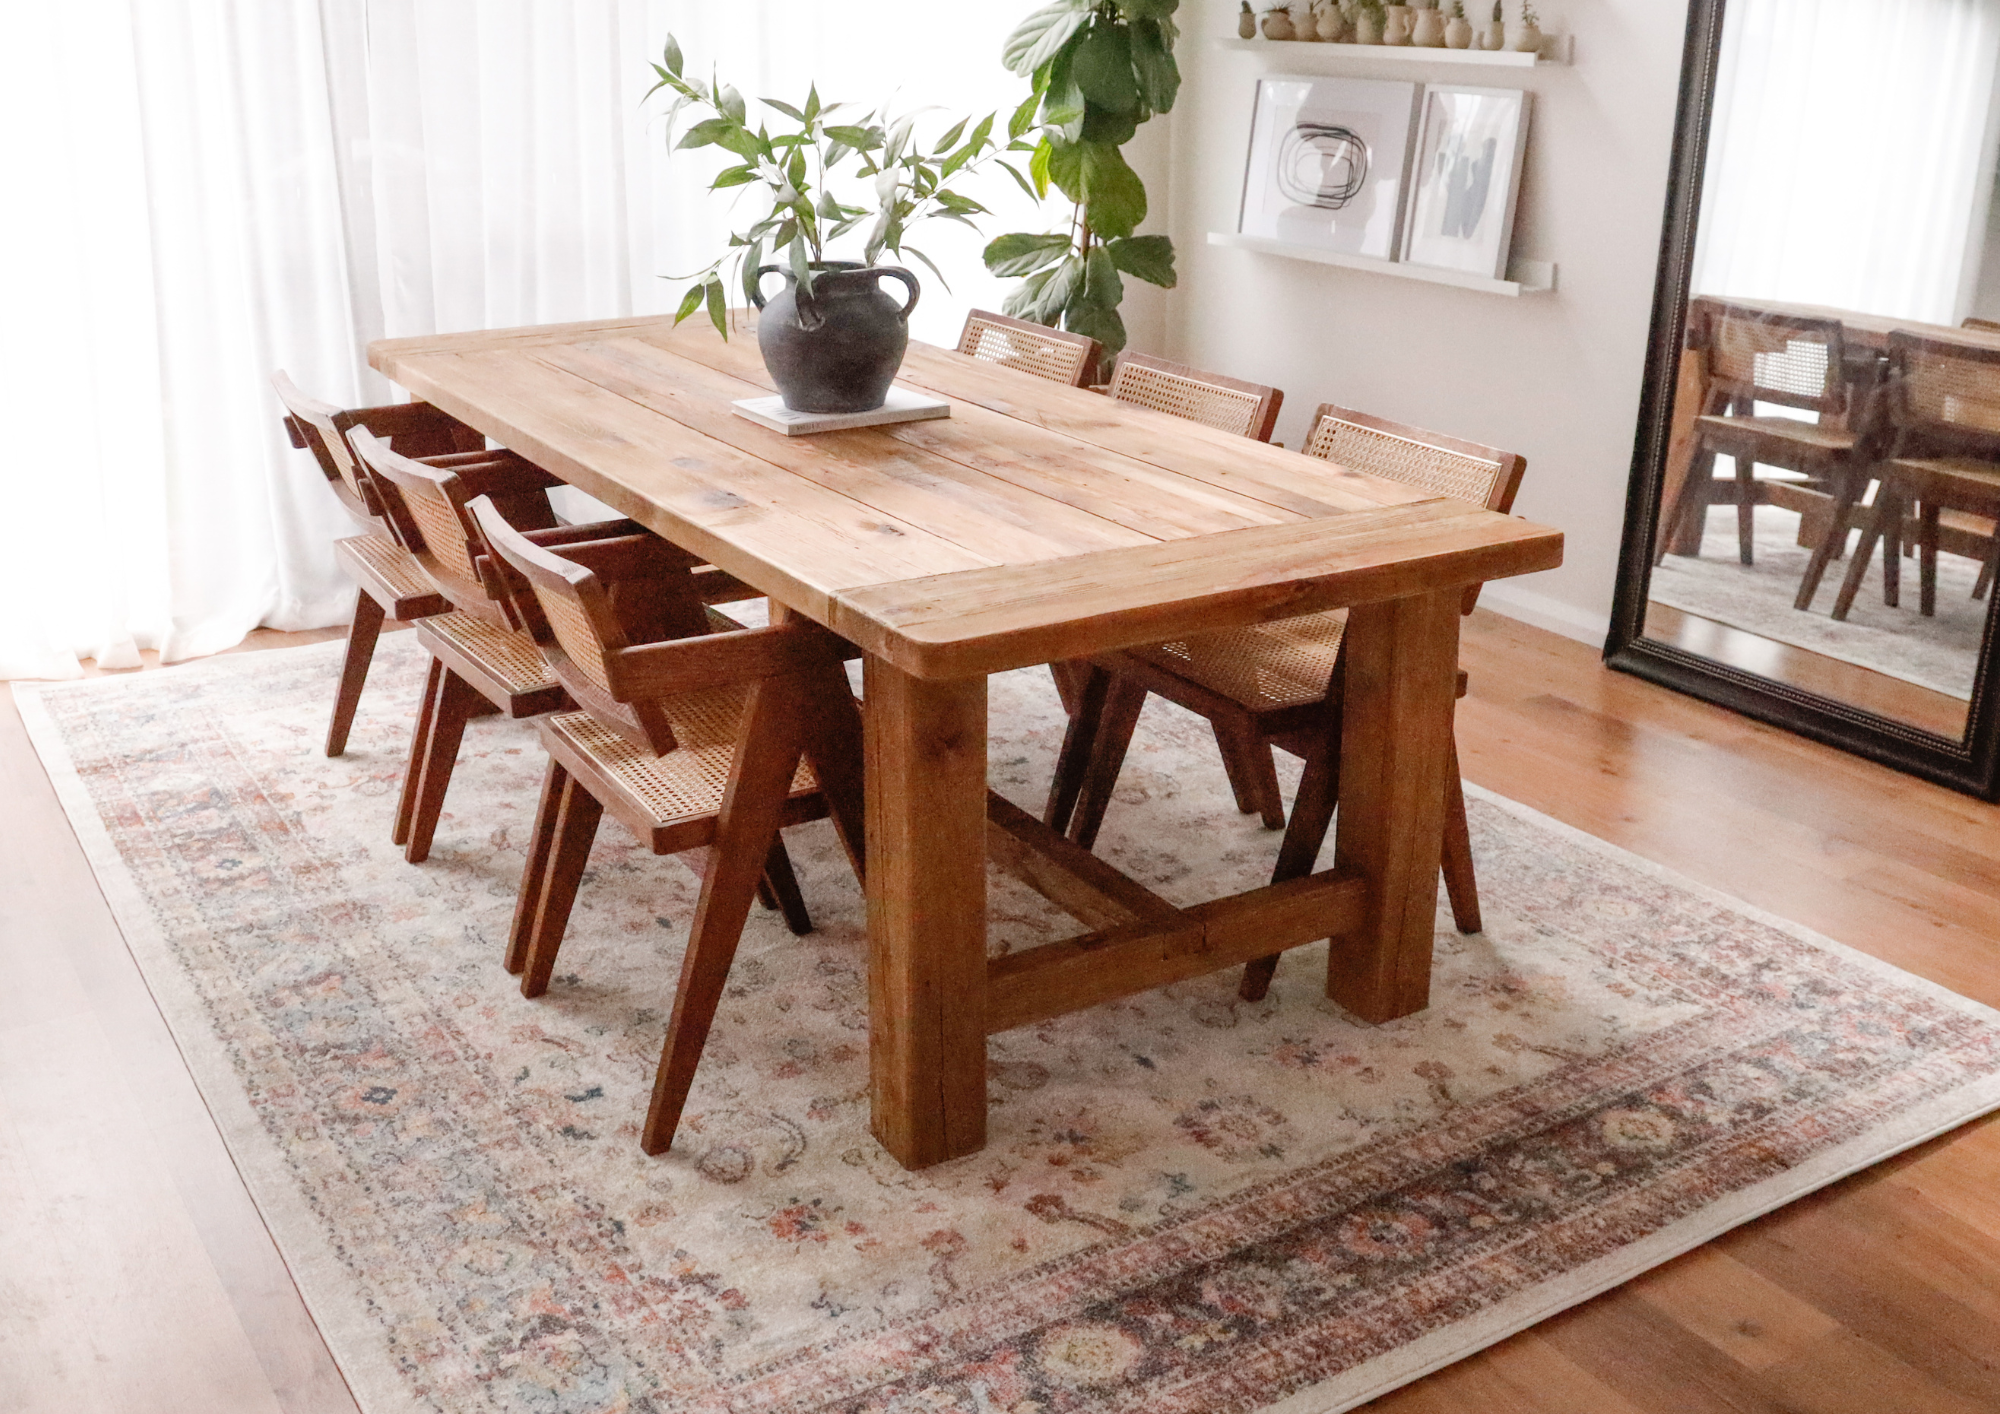 How To Create A Rustic Dining Room For Gatherings